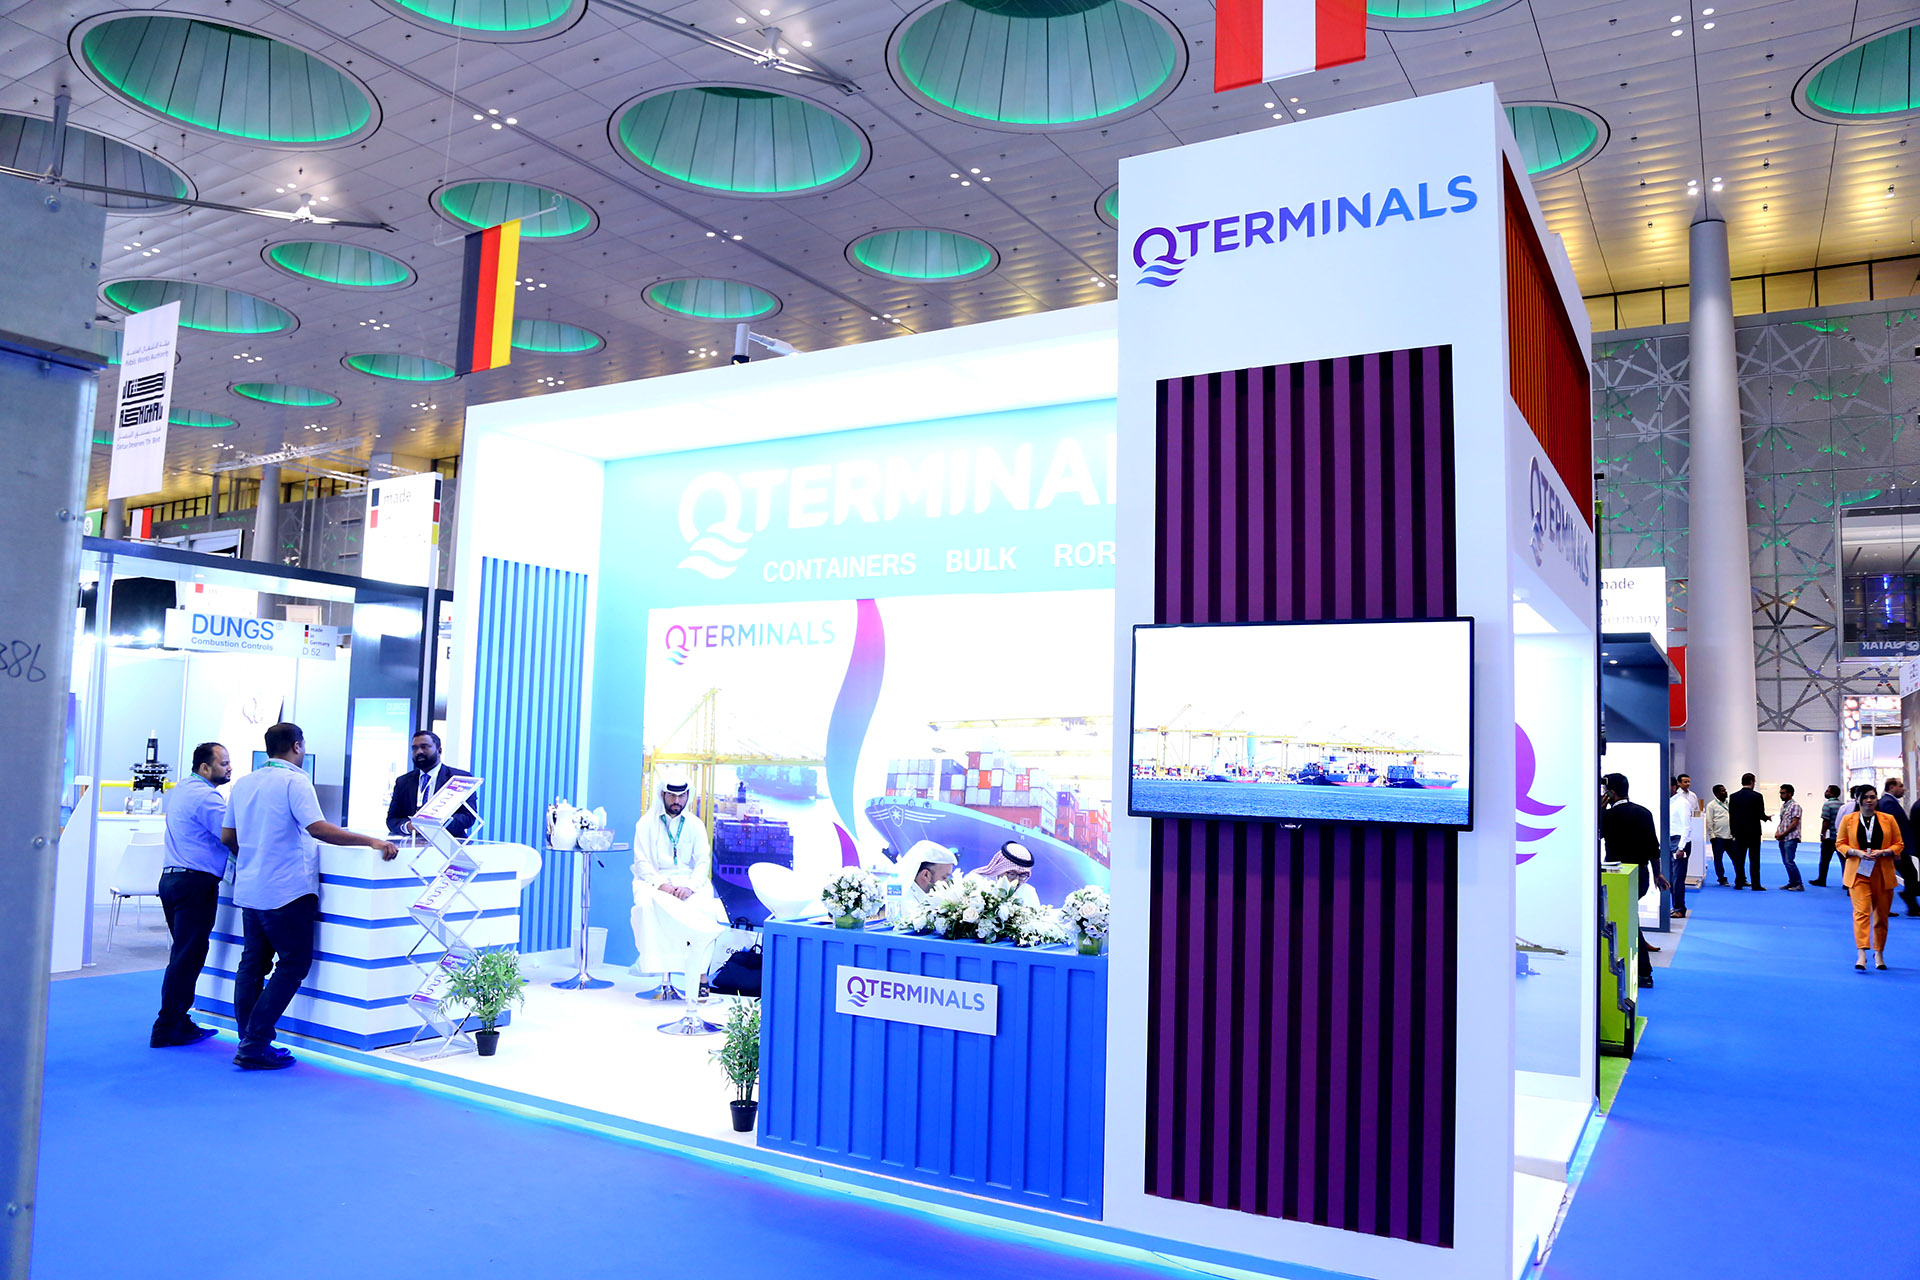 Award winning exhibition stand for QTerminals at Project Qatar, designed and fabricated by ME Visual